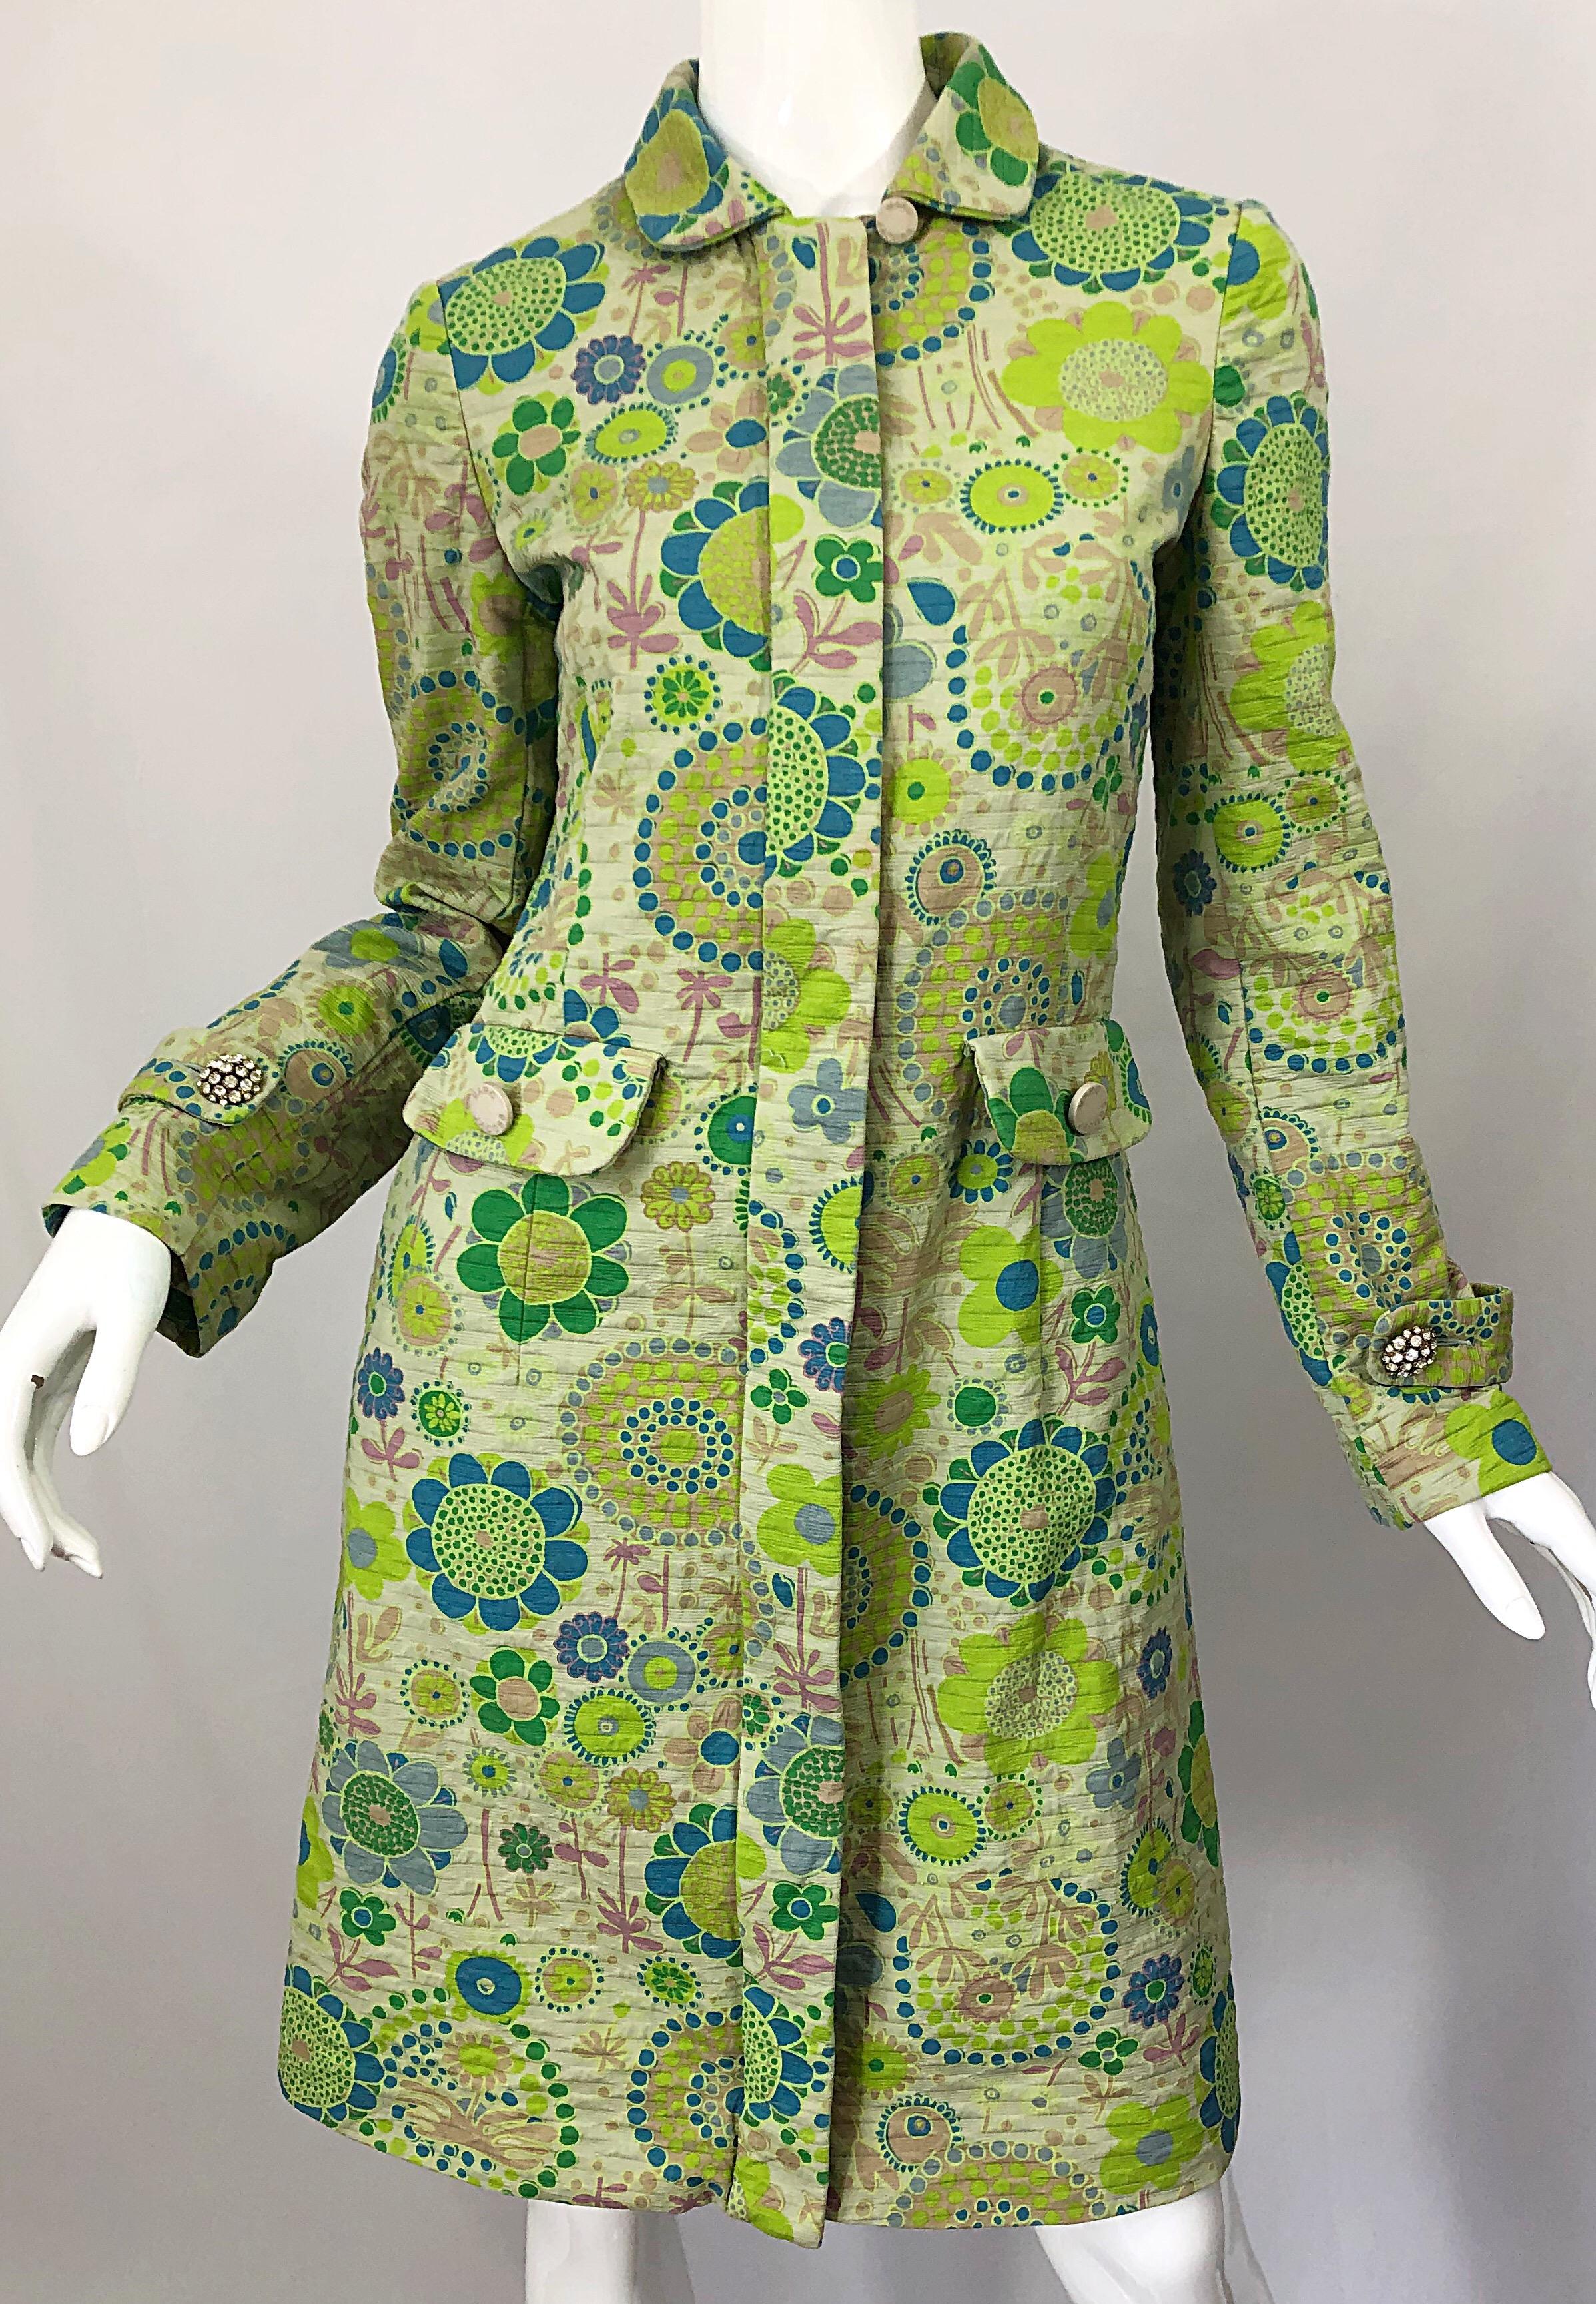 Marc Jacobs Collection Neon Green Blue Rhinestone Mod 60s Style Cotton Jacket For Sale 7